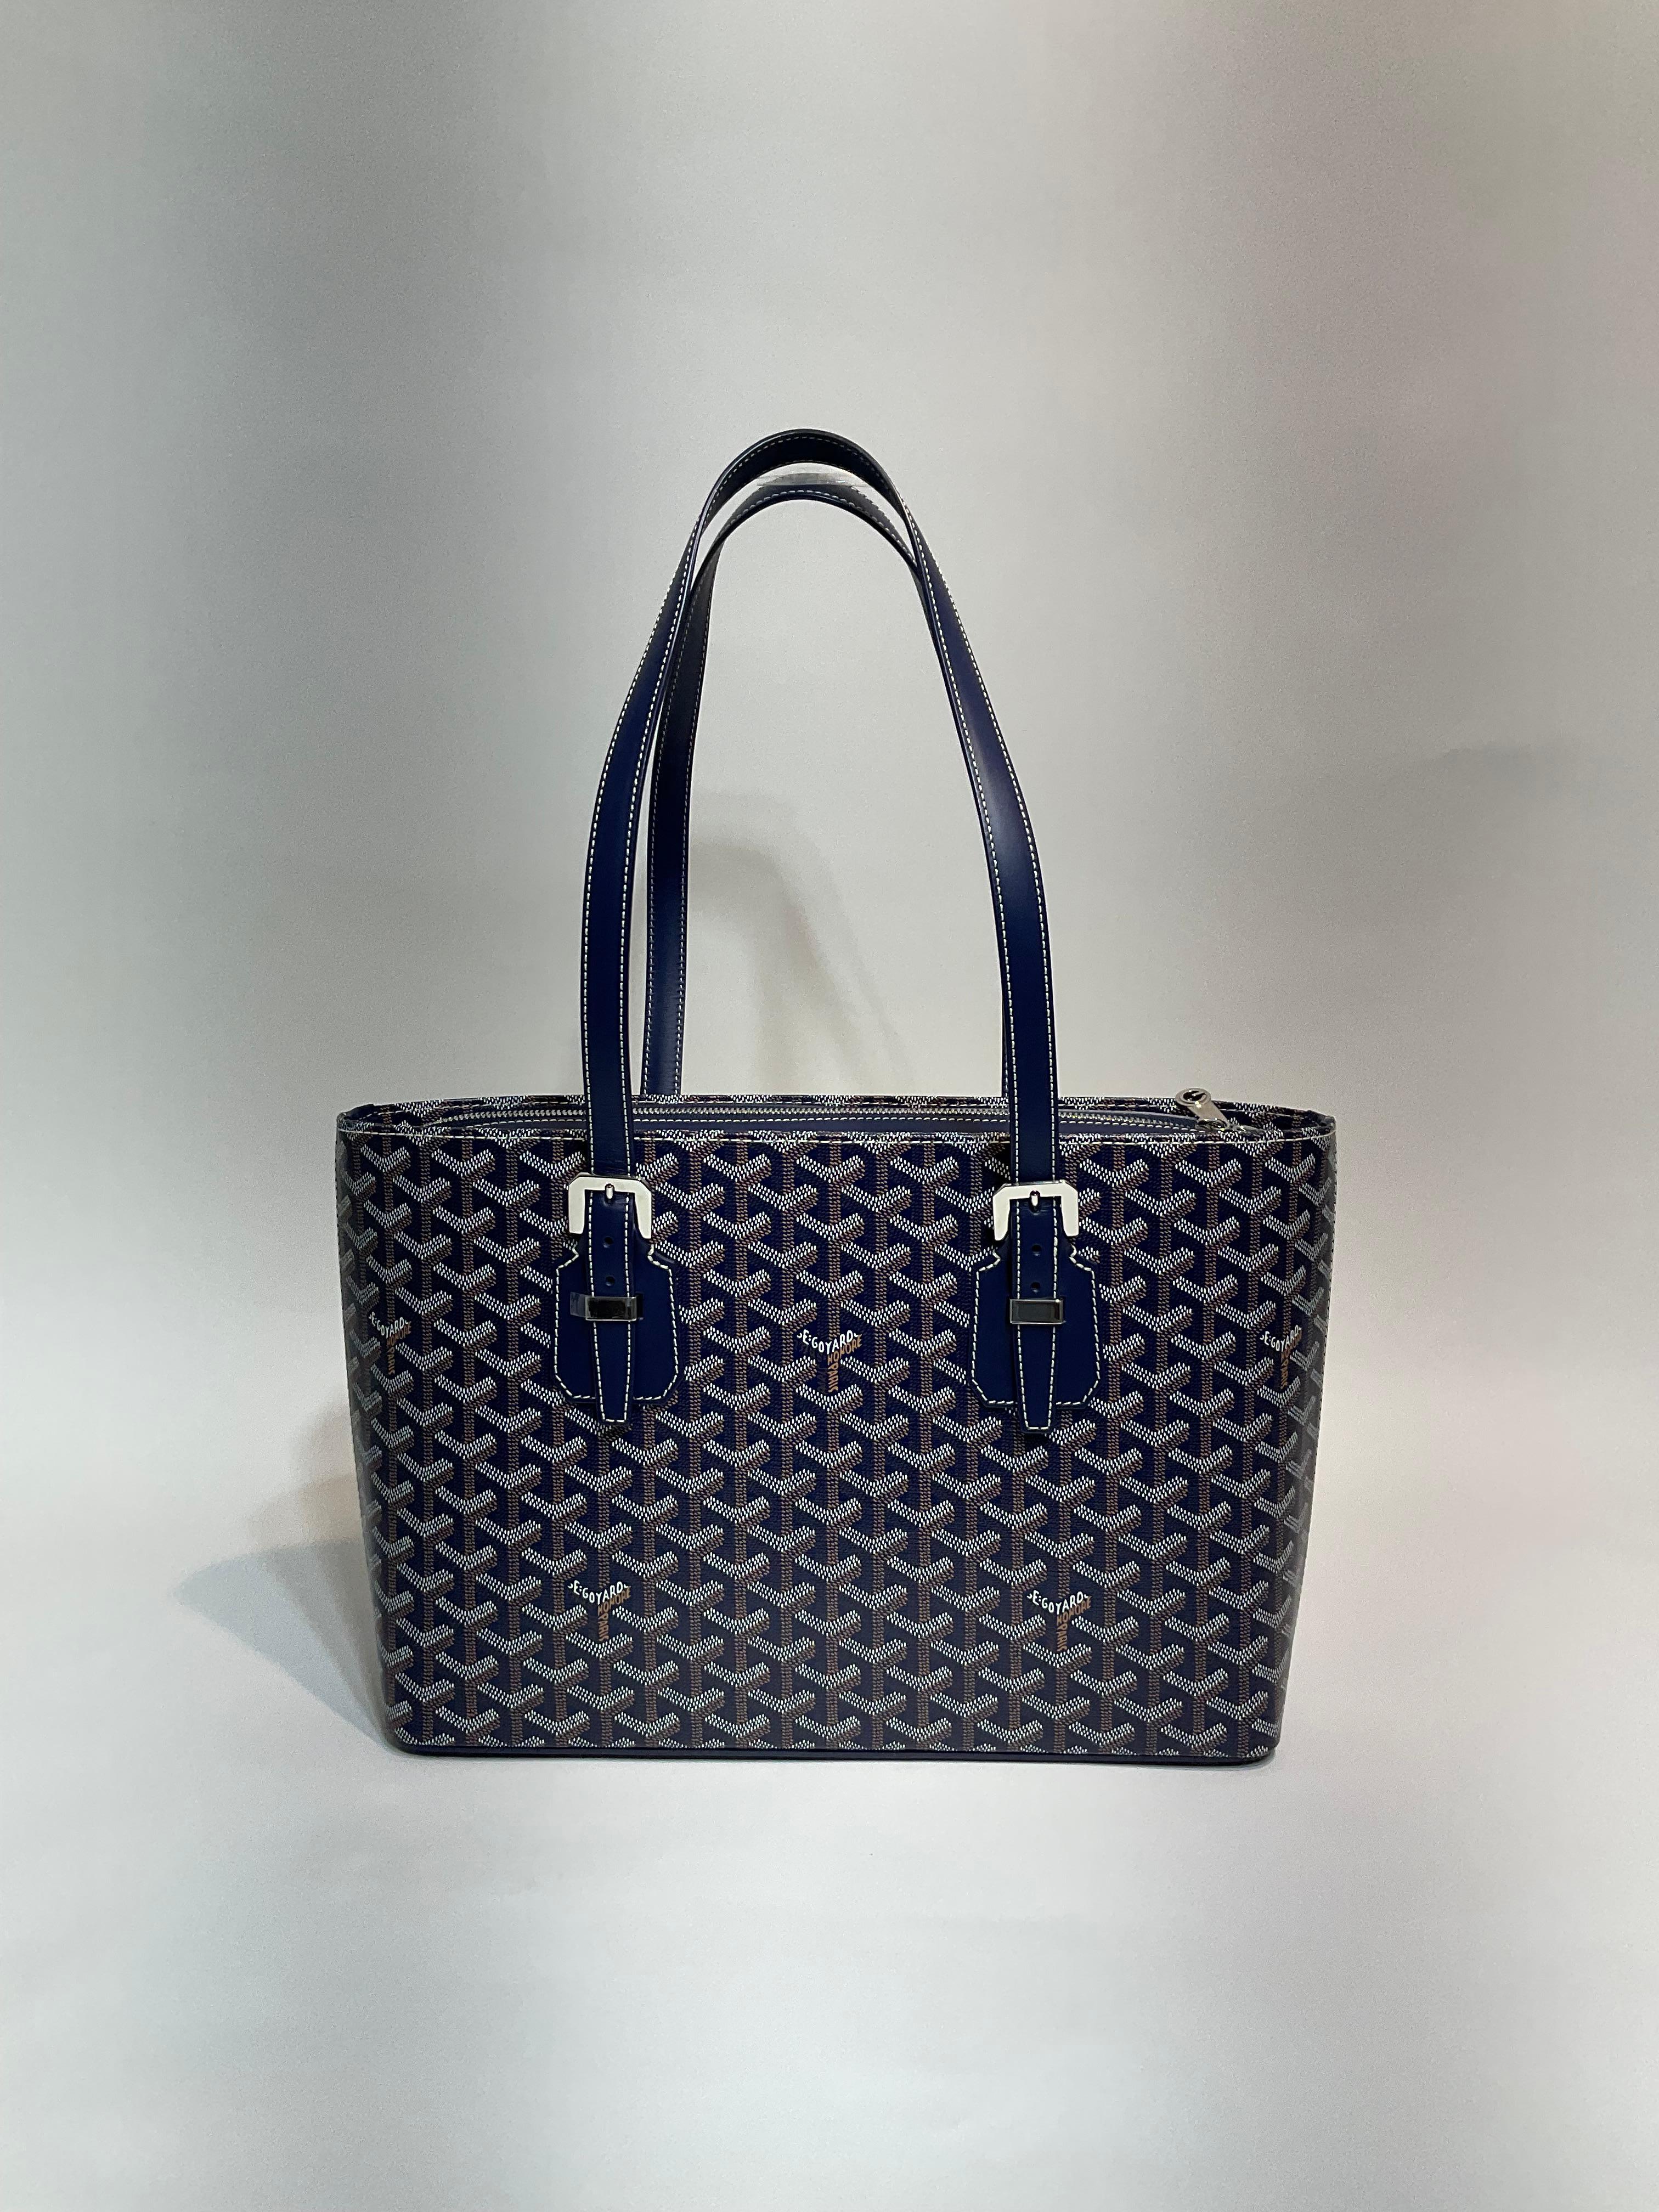 Goyard Navy Goyardine Canvas PM Tote
Perhaps carried one time; appears never carried. 
Rich navy blue Goyardine canvas with signature chevron patterned monogram.  Smooth leather trimmings and straps.  Adjustable polished silver buckles and zippered